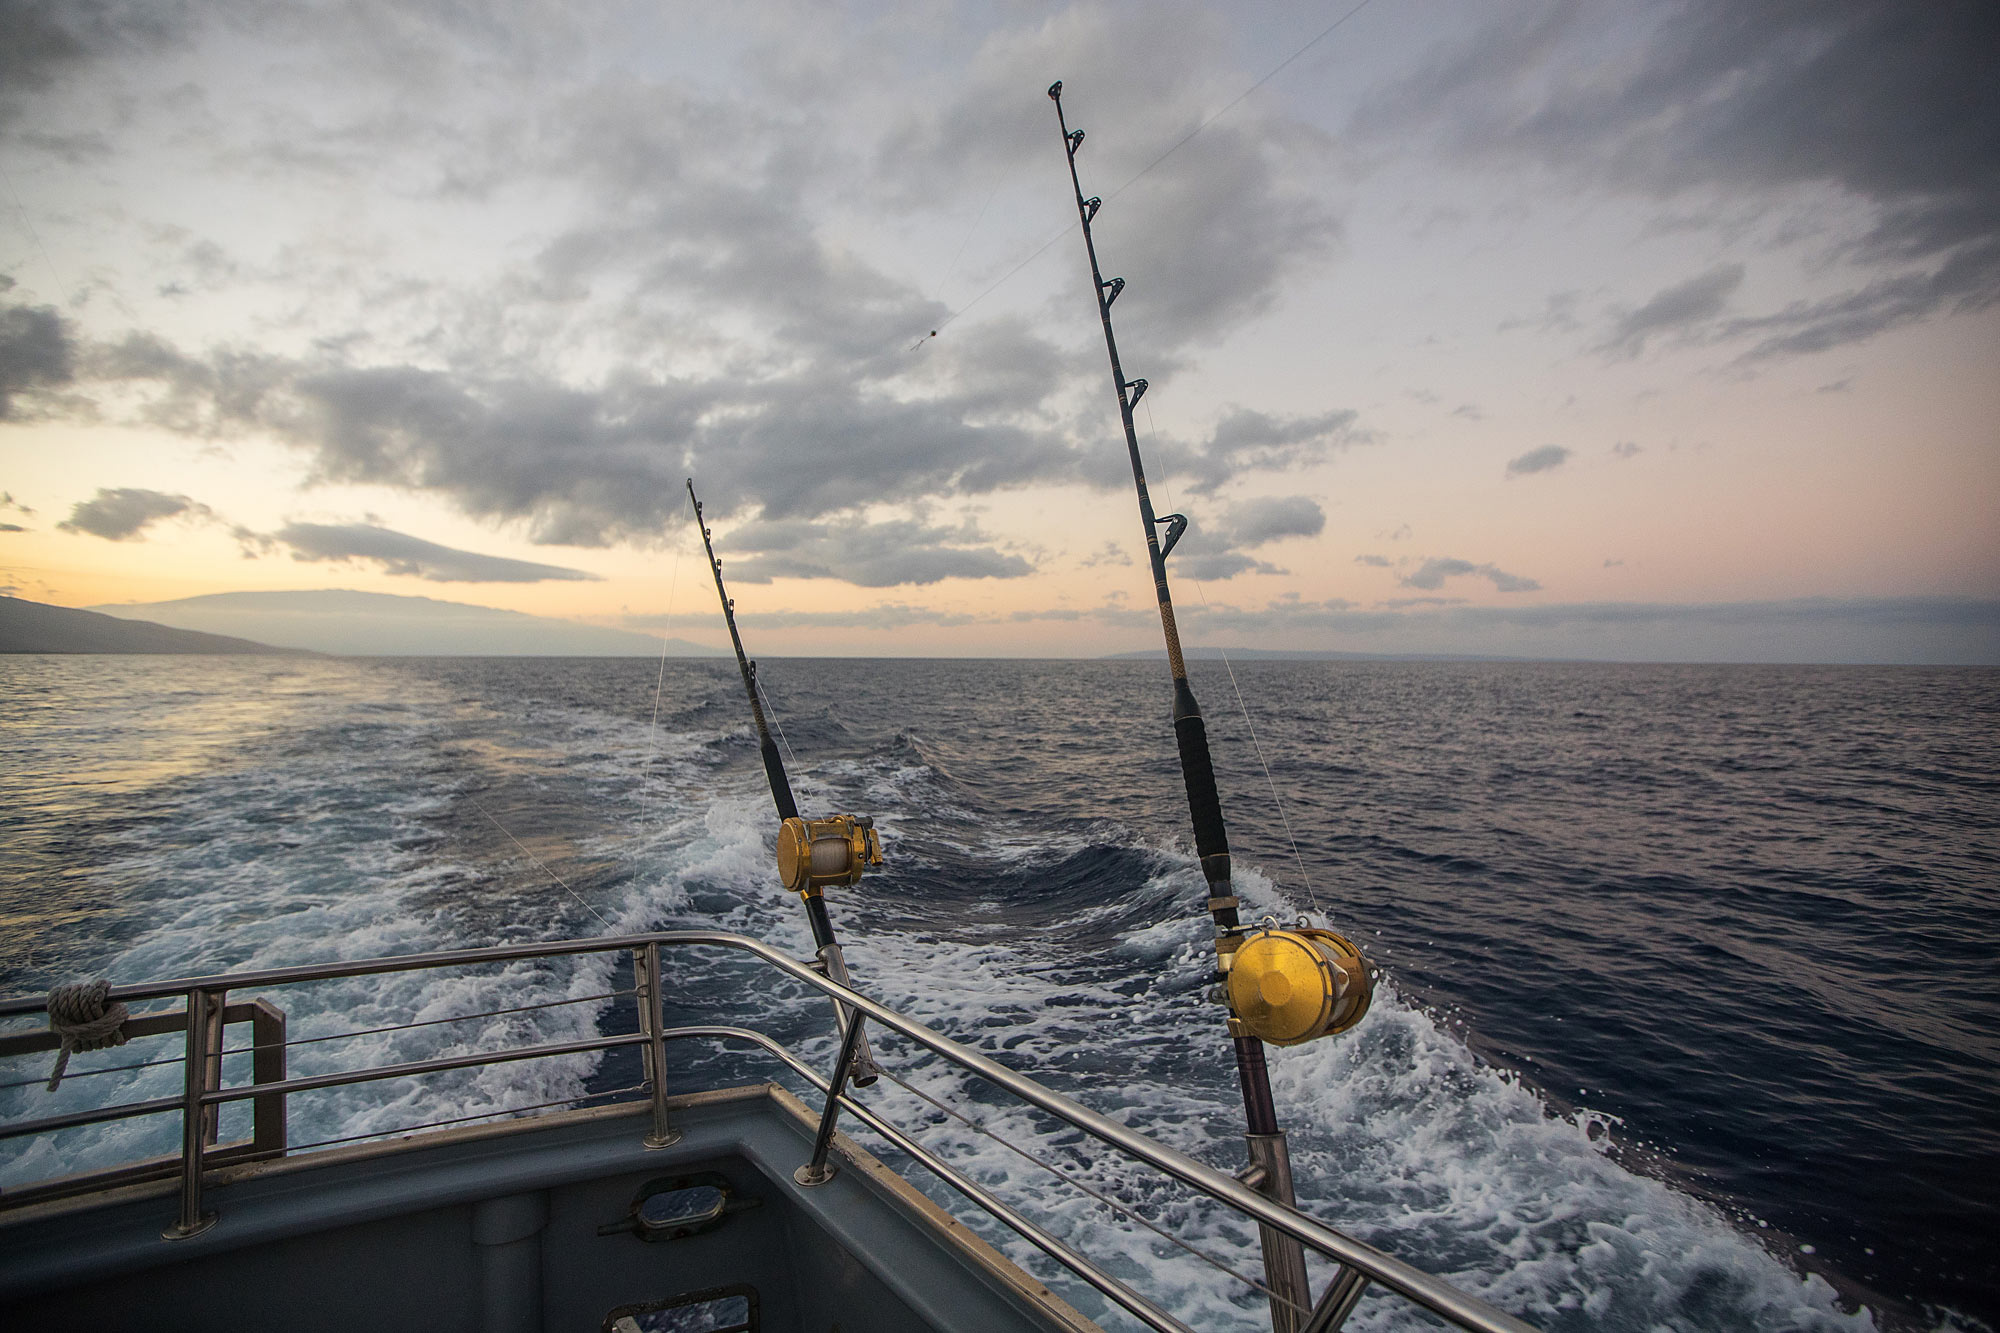 Clipper Oil: Latest Fishing News – WCPFC Continues to Suspend Requirements For Fishing Observers on Tuna Vessels Until 2023